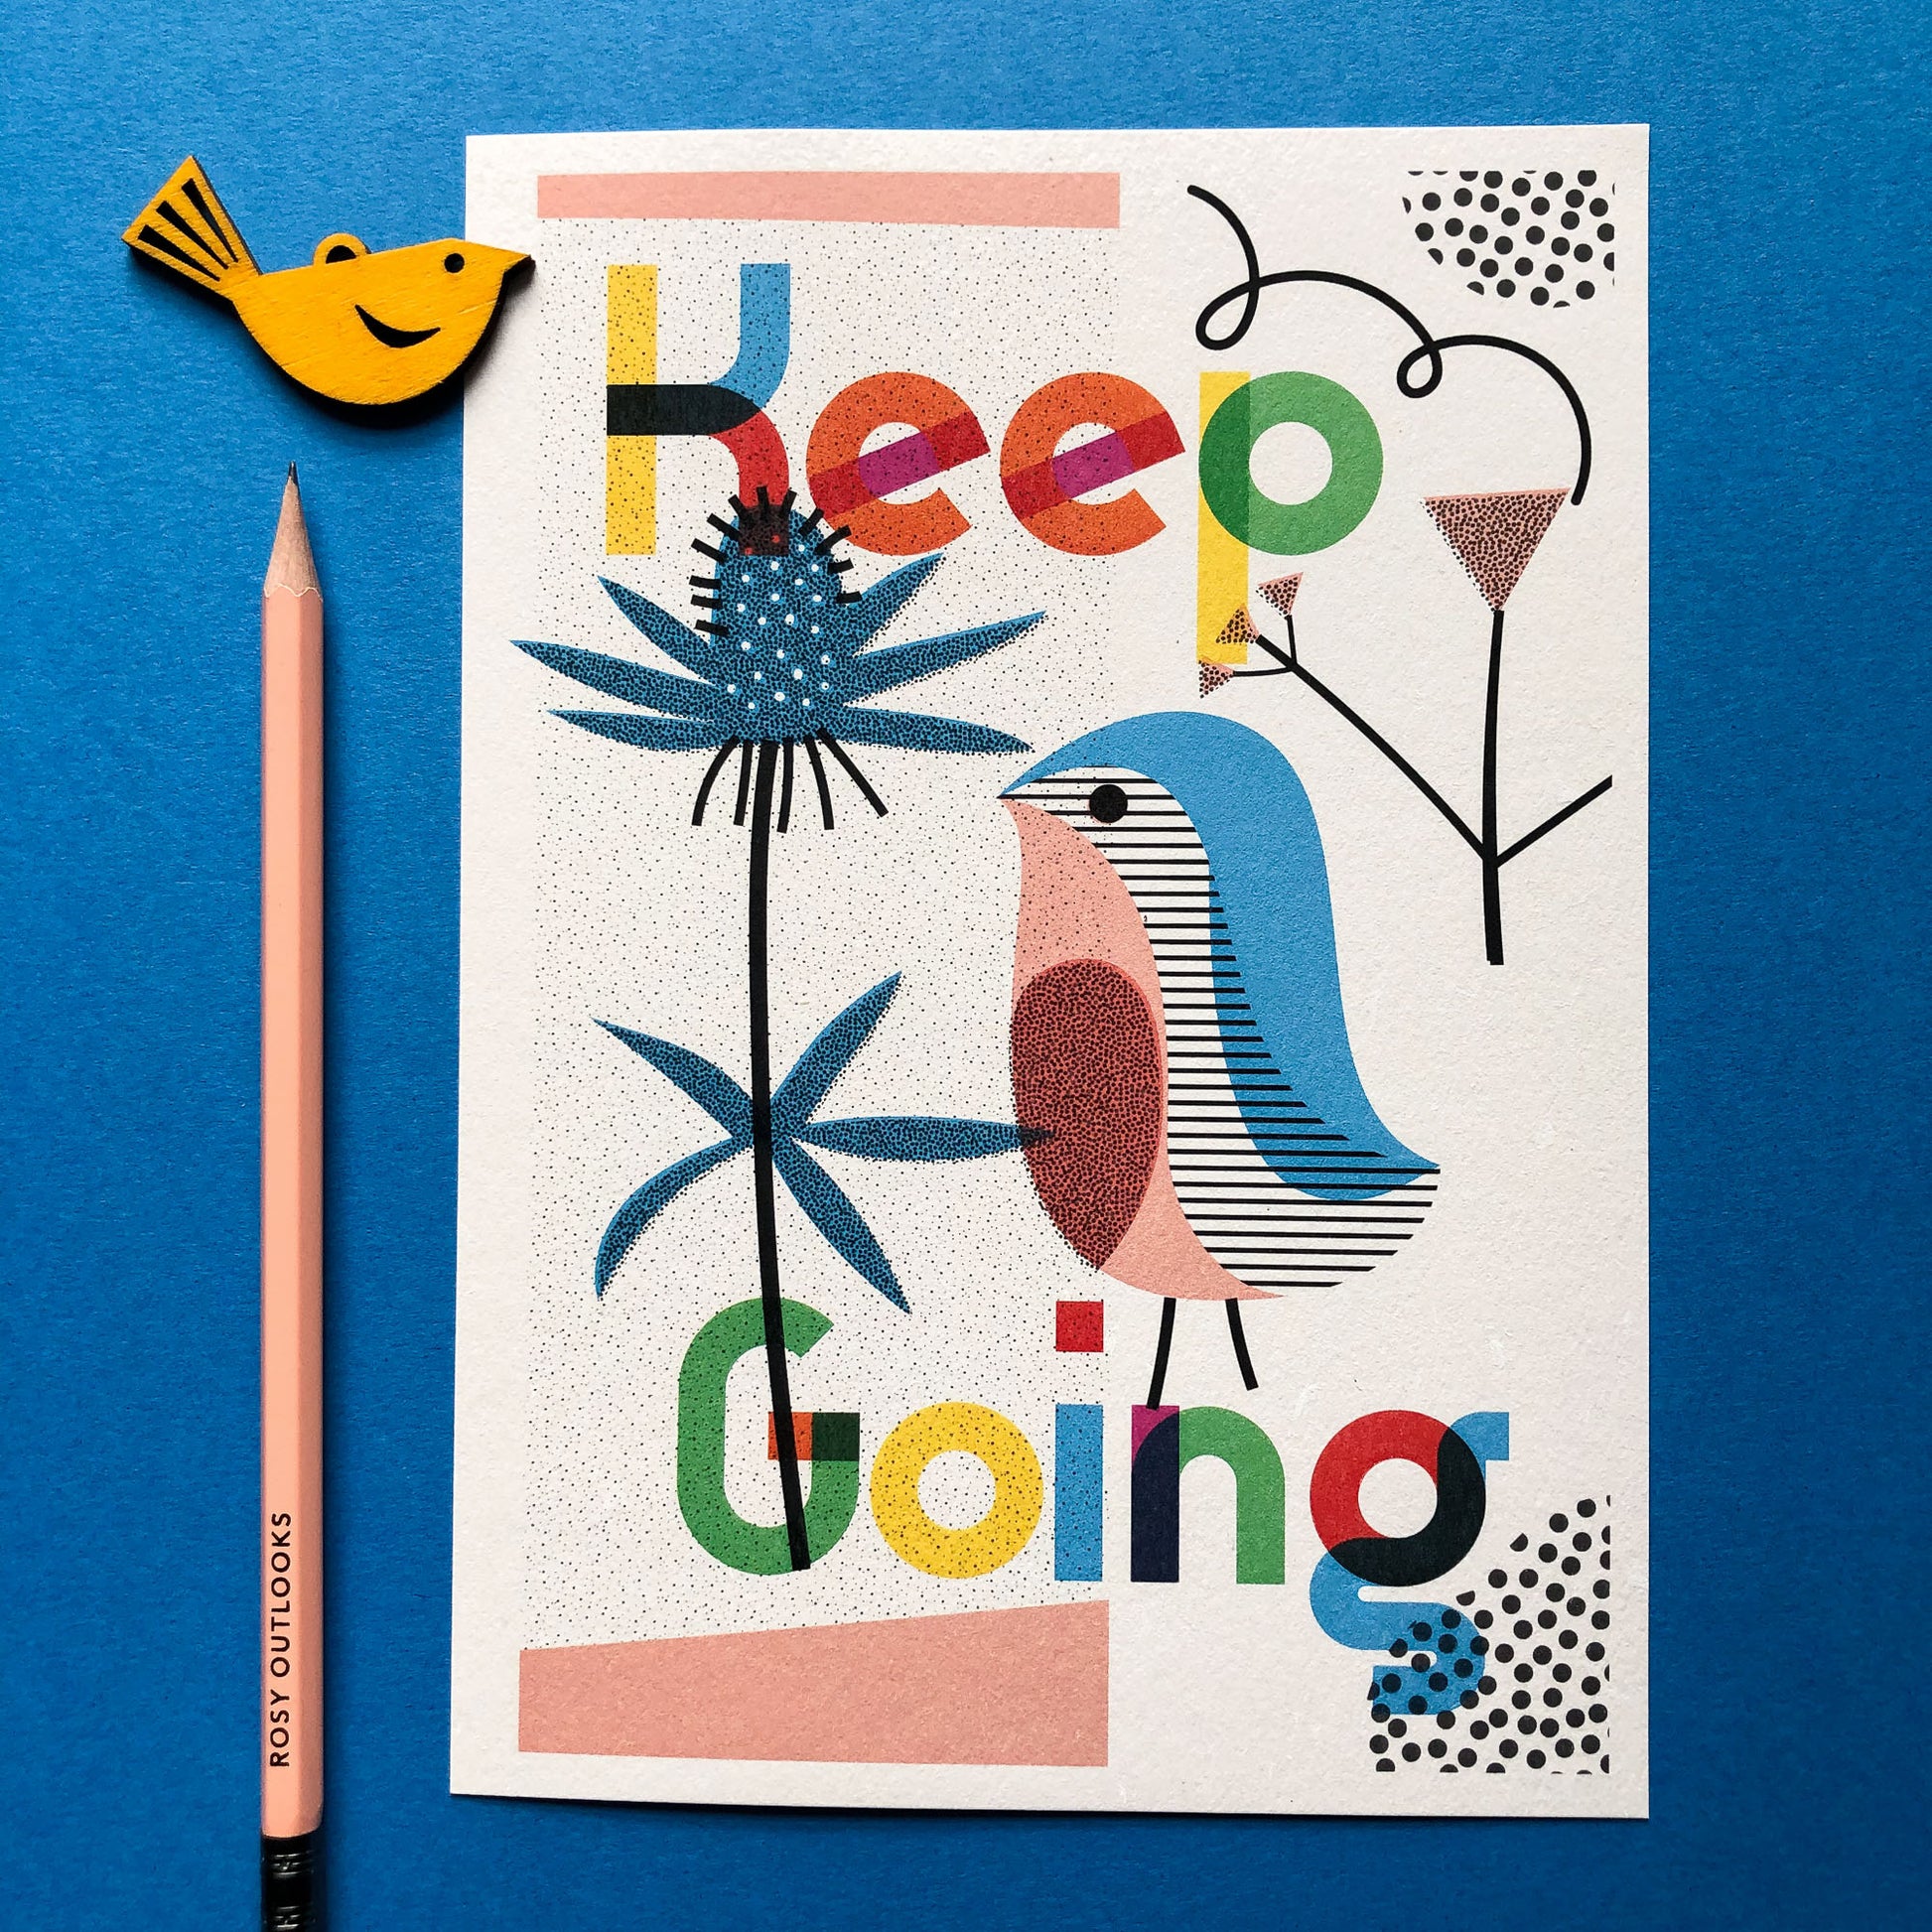 A4 Keep Going Art Print by The Print Lass. Shown unframed on a blue background with a pencil and small wooden bird (not included)